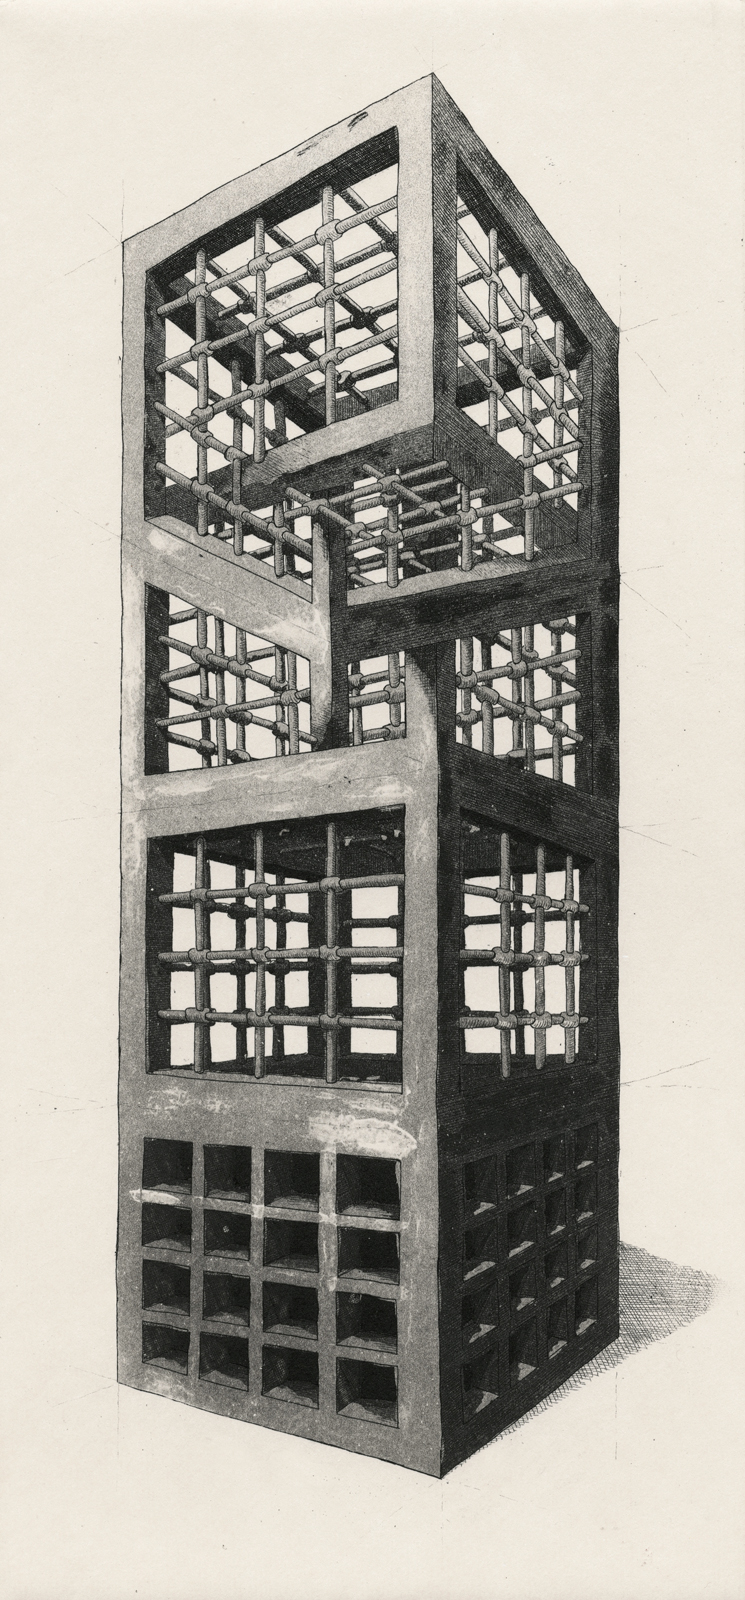 housing estate tower block geometry of living printmaking impossible figure illusion rubik's cube cage labirynth sketch etching aquatint council estate Impossible object